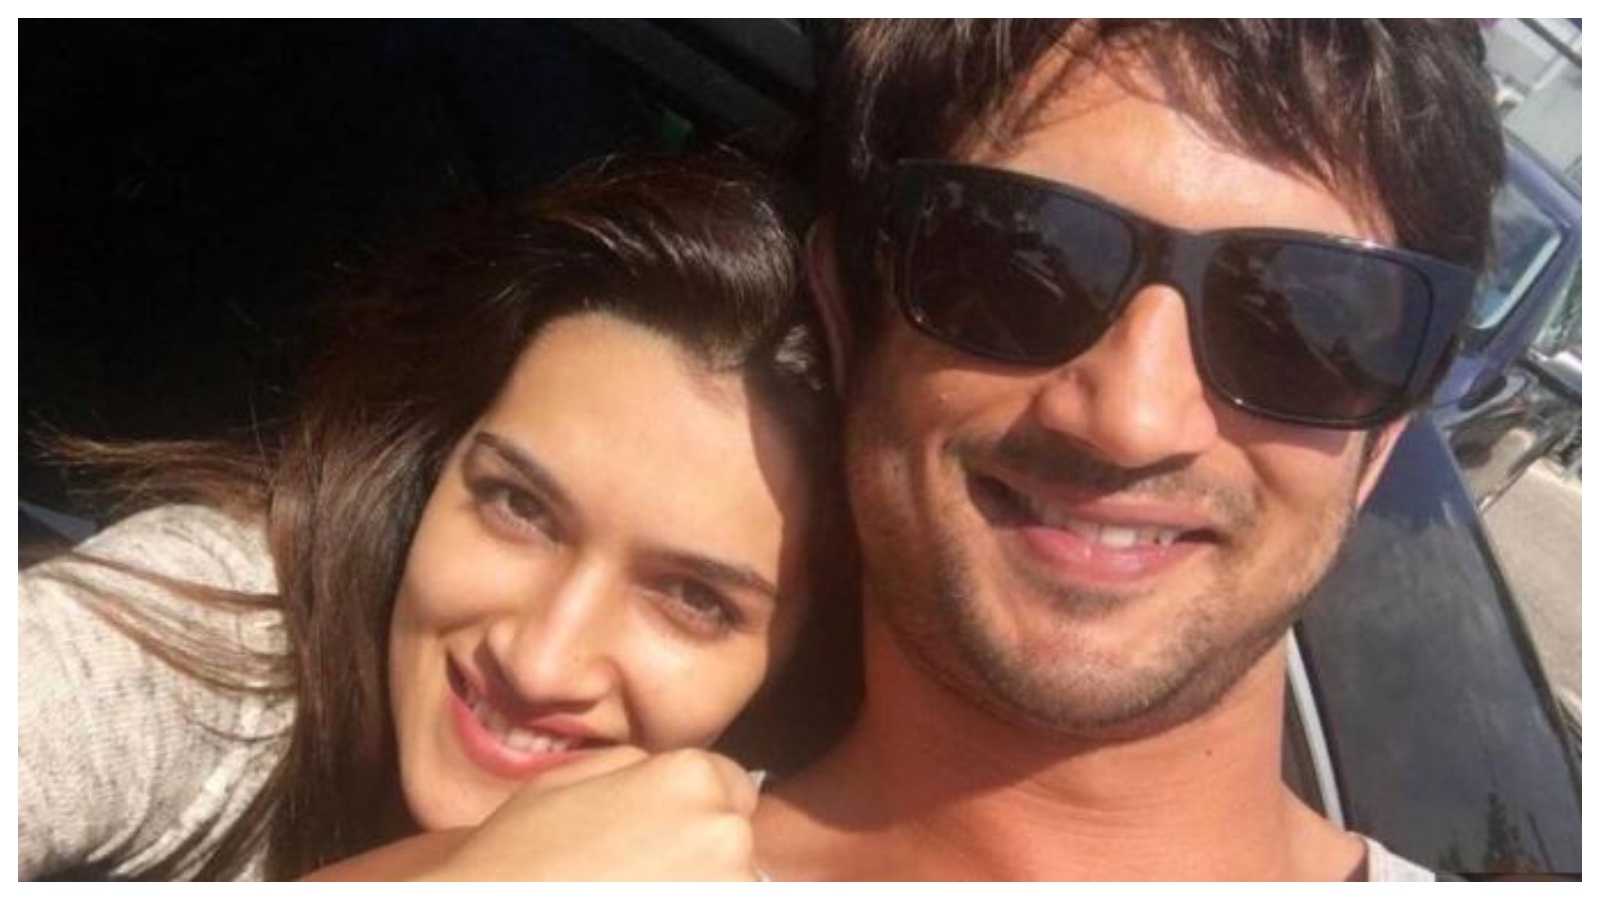 Does Kriti Sanon's Blue Butterfly production house have a connection with Sushant Singh Rajput? Netizens feel so